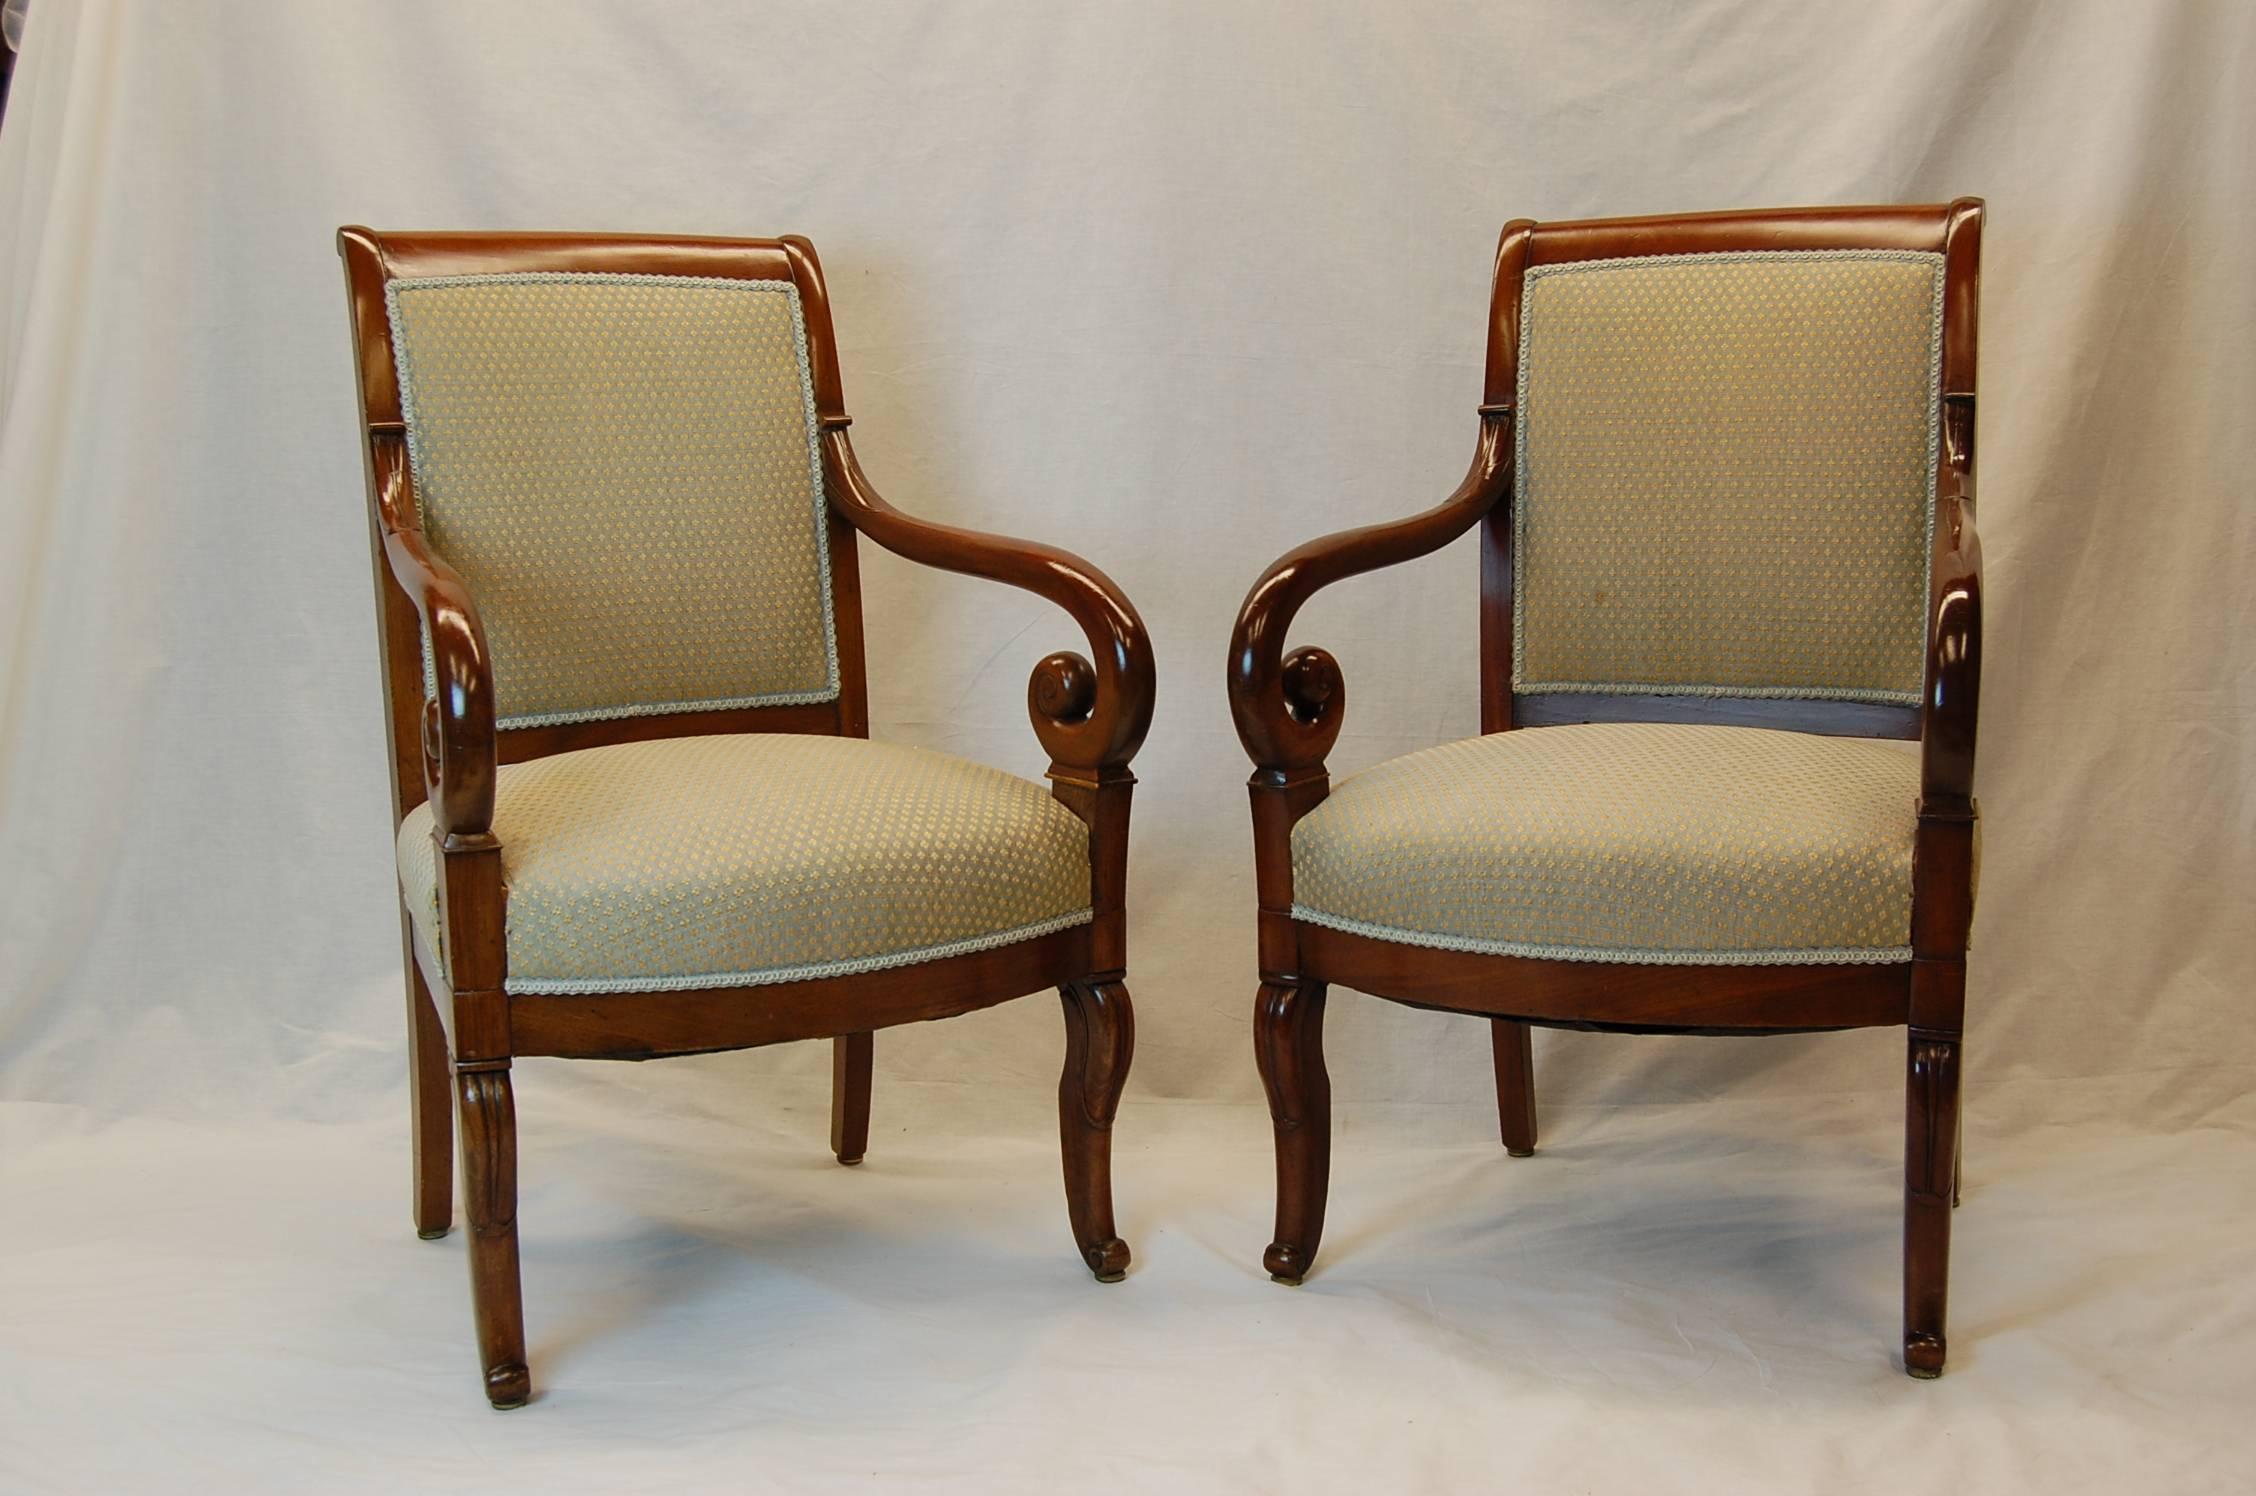 Pair of Carved Mahogany Restauration Period Armchairs, Early 19th Century In Excellent Condition For Sale In Pittsburgh, PA